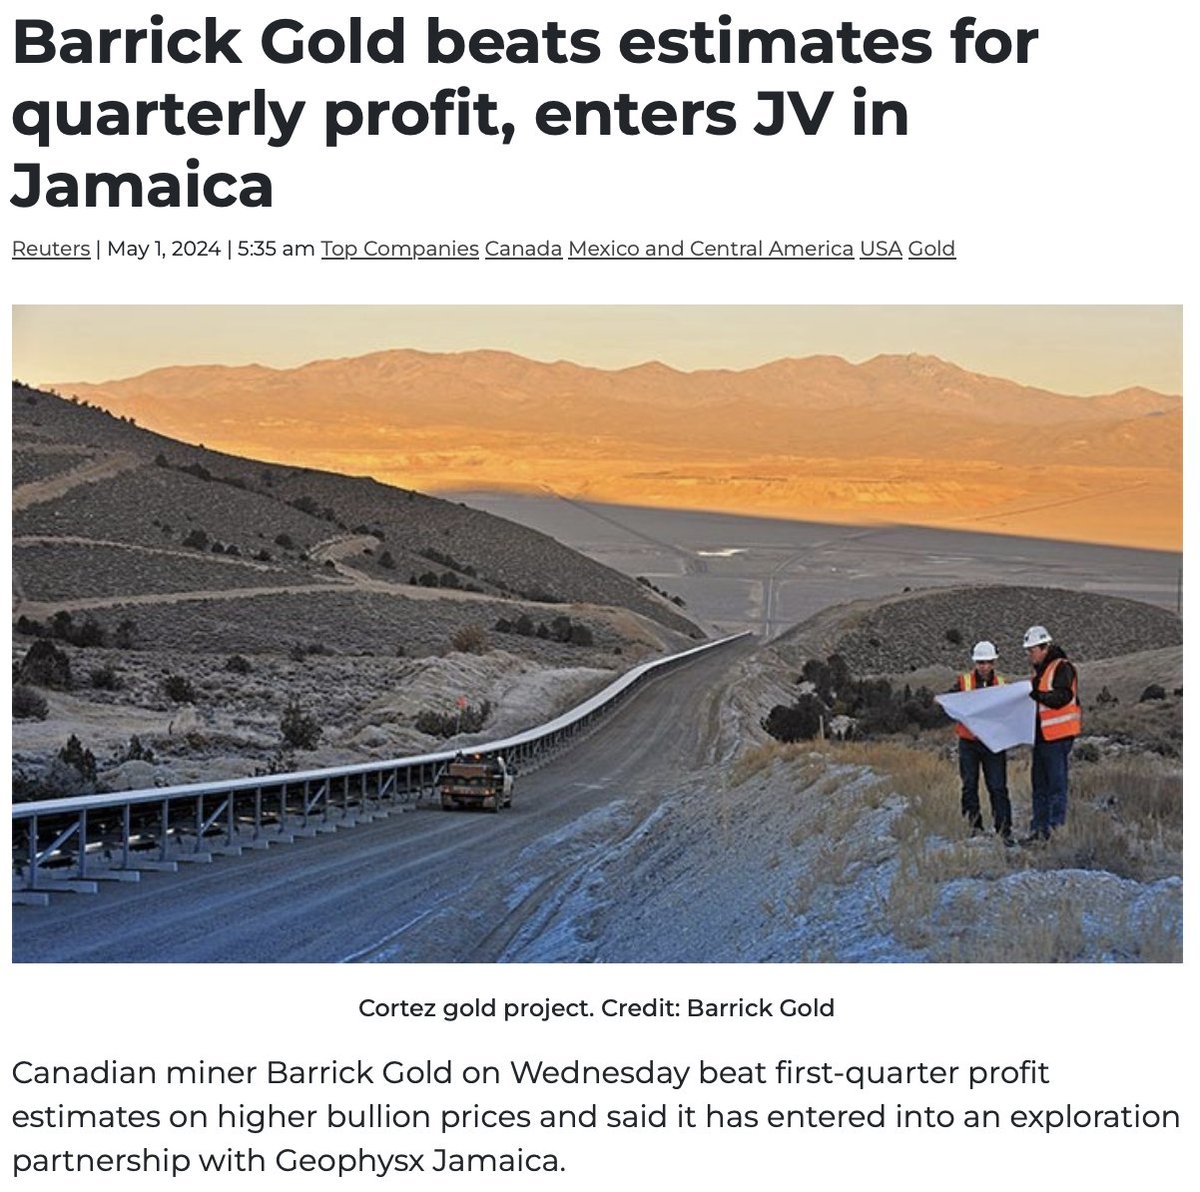 Newmont, Barrick, and Agnico have all posted beats this quarter.

This is exactly what #gold #mining companies need to do for the sector to regain credibility.

IMO, that's bullish for gold stocks as a class.